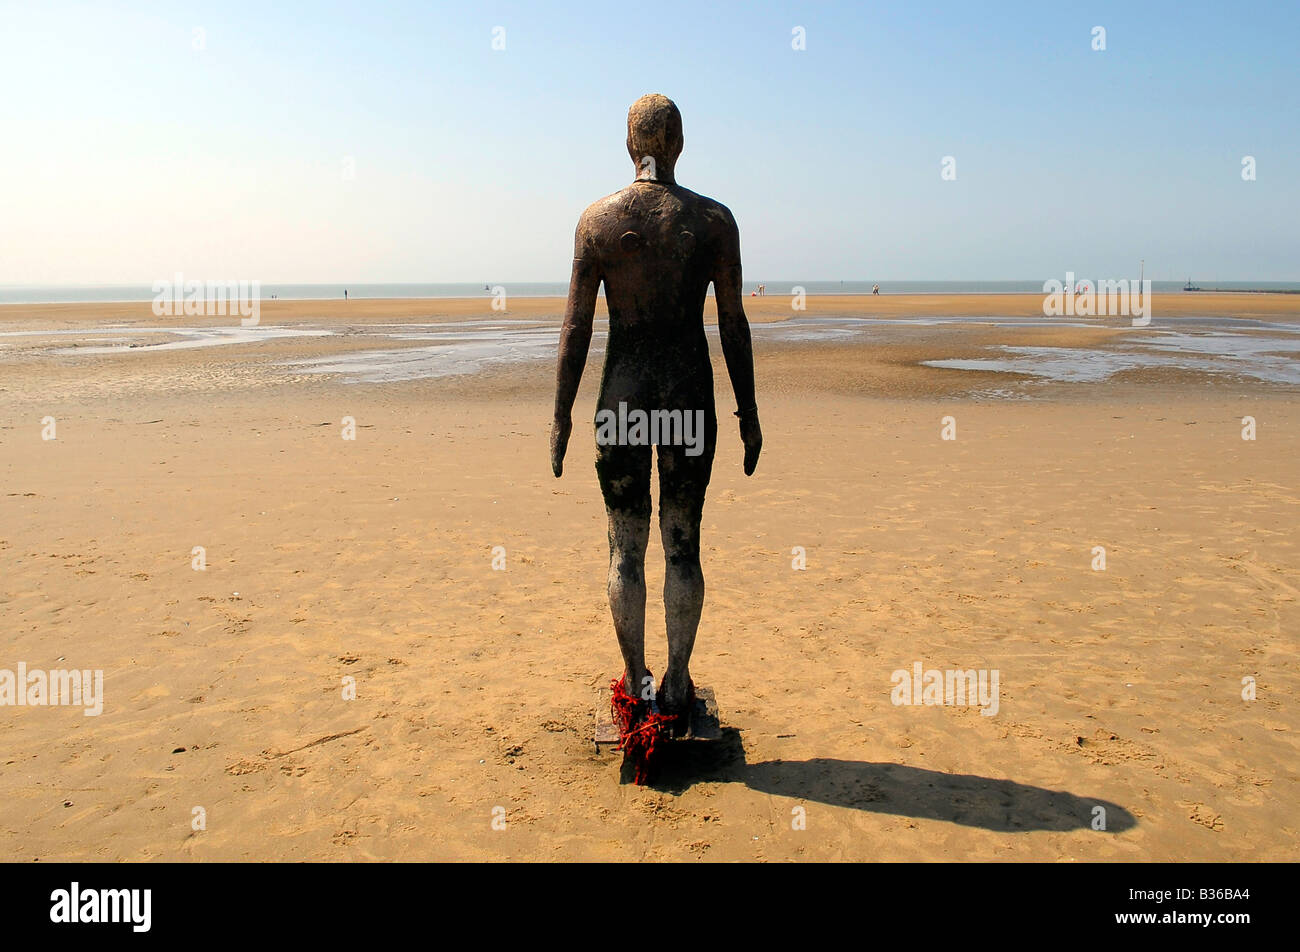 another place ironman anthony gormley sculpture art crosby beach liverpool summer england uk travel tourism seaside coast Stock Photo